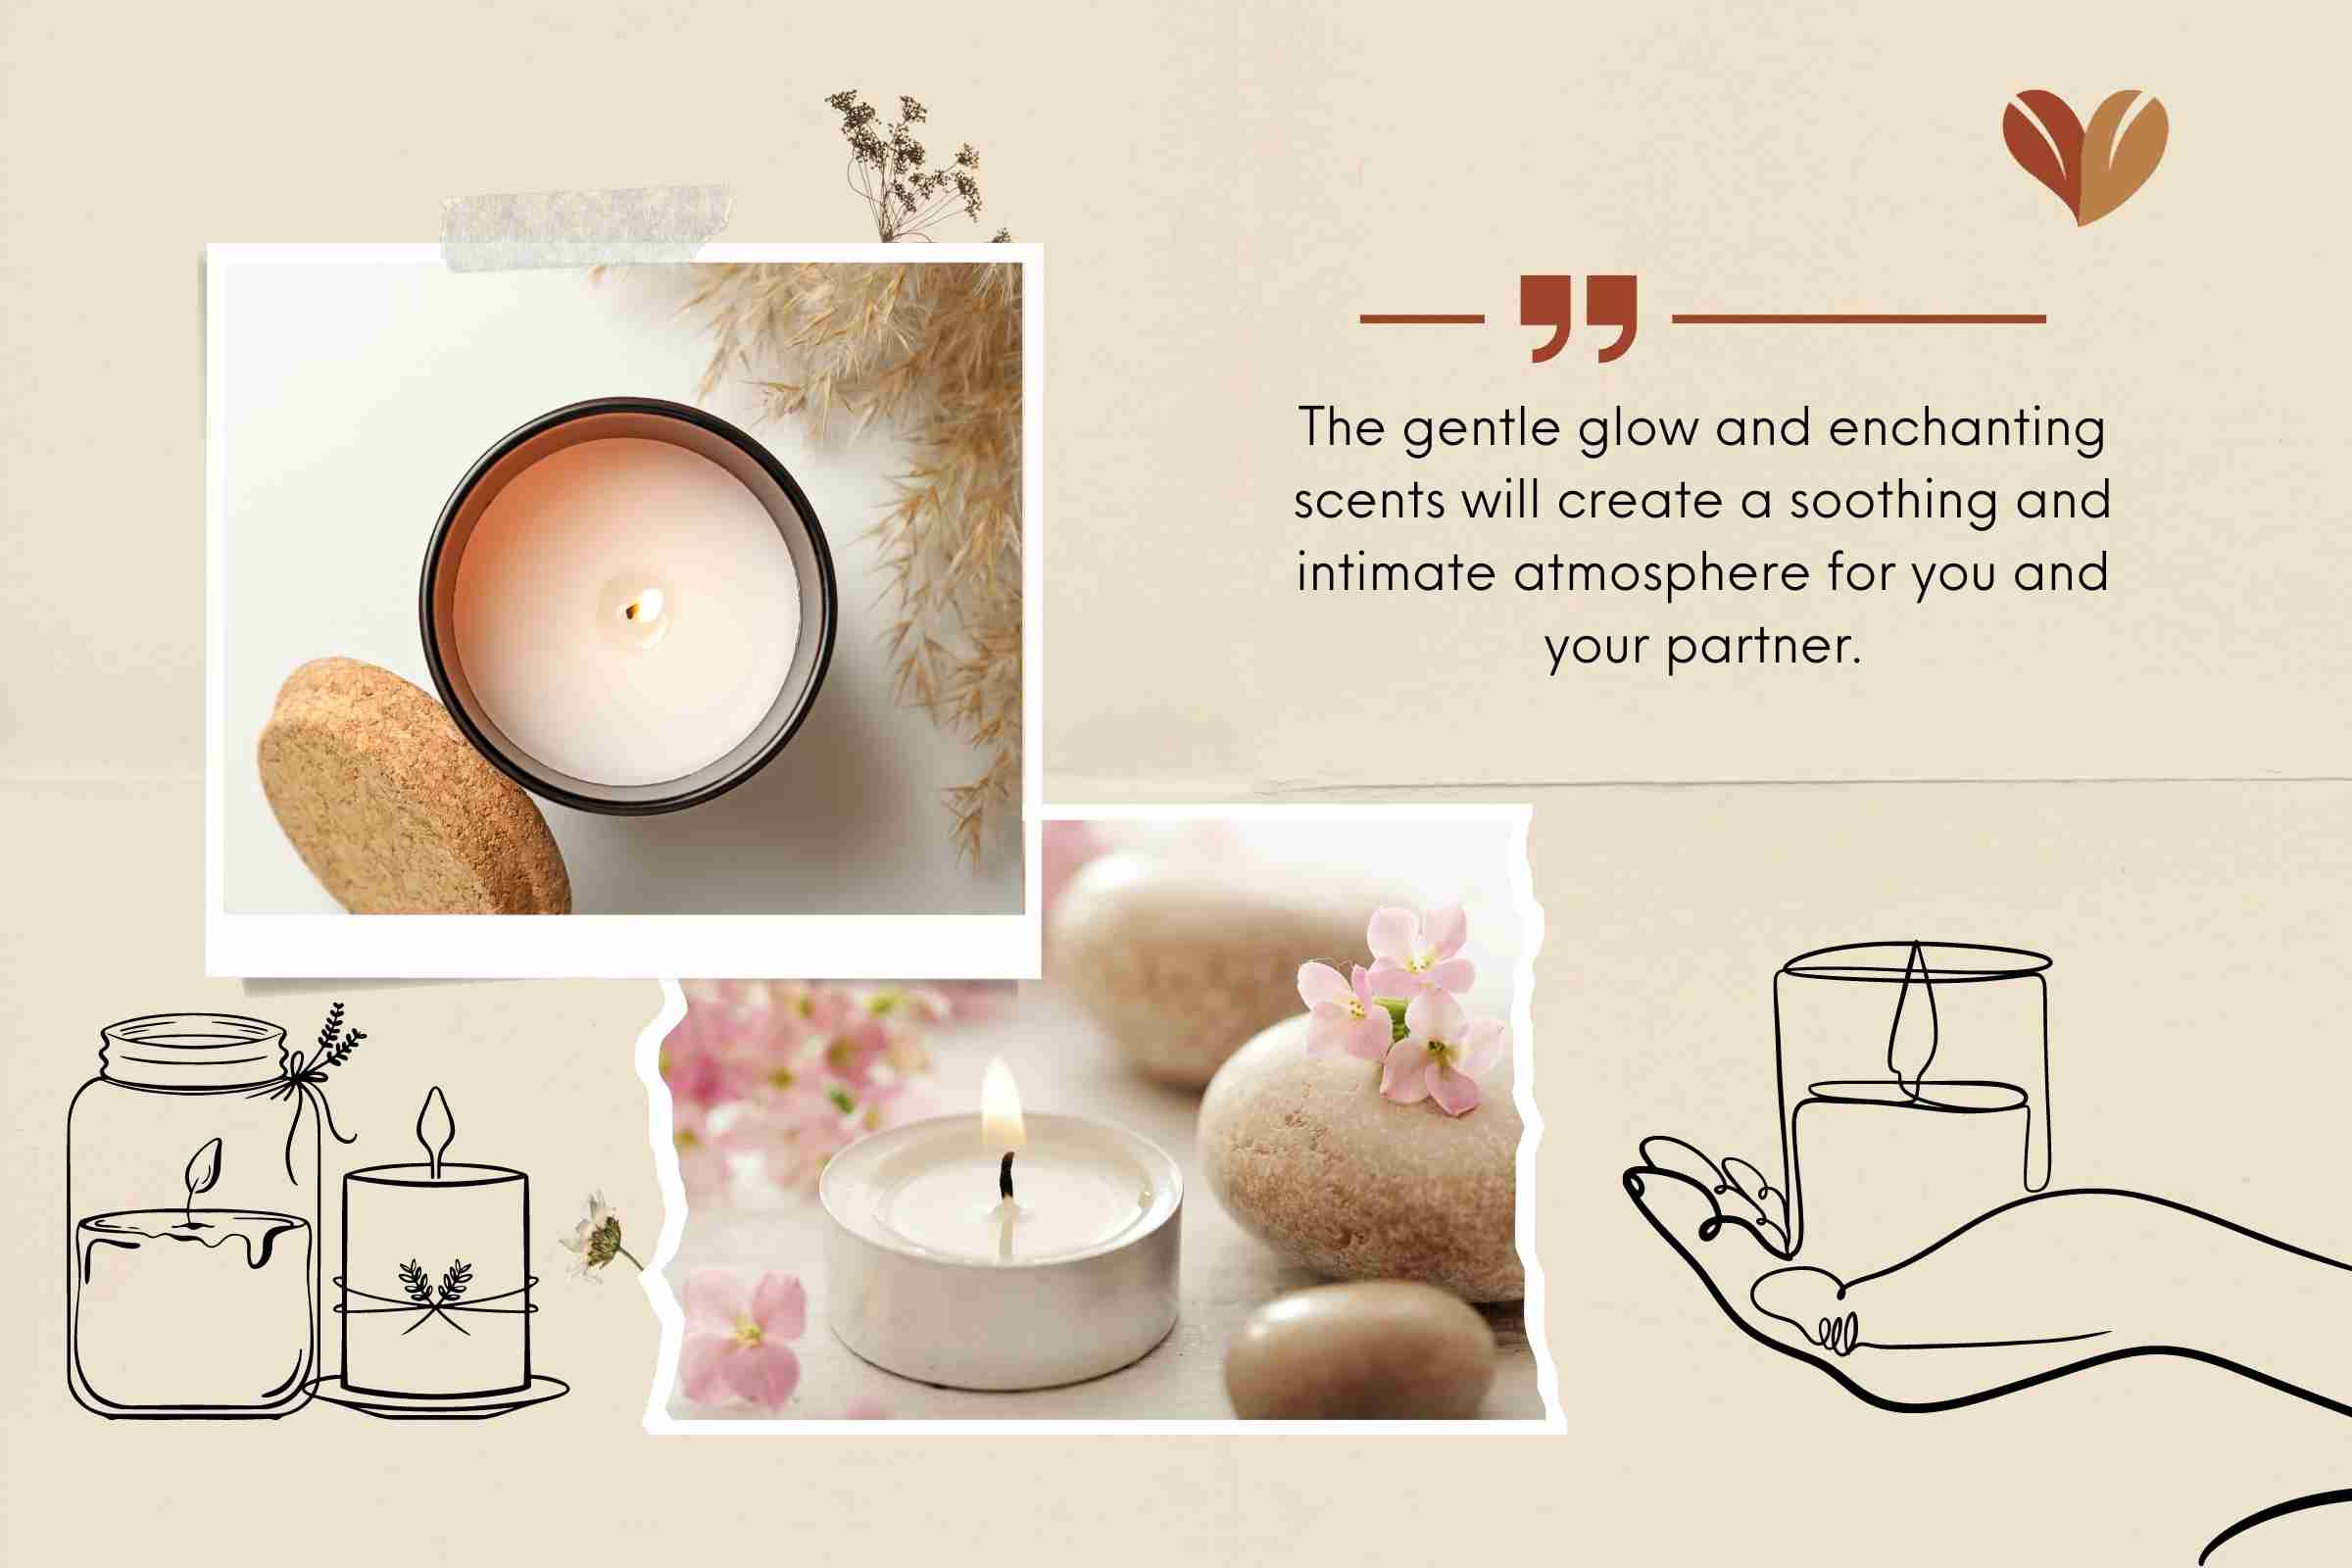 Set a romantic ambiance in your bedroom with the soft flickering light and captivating scents of scented candles